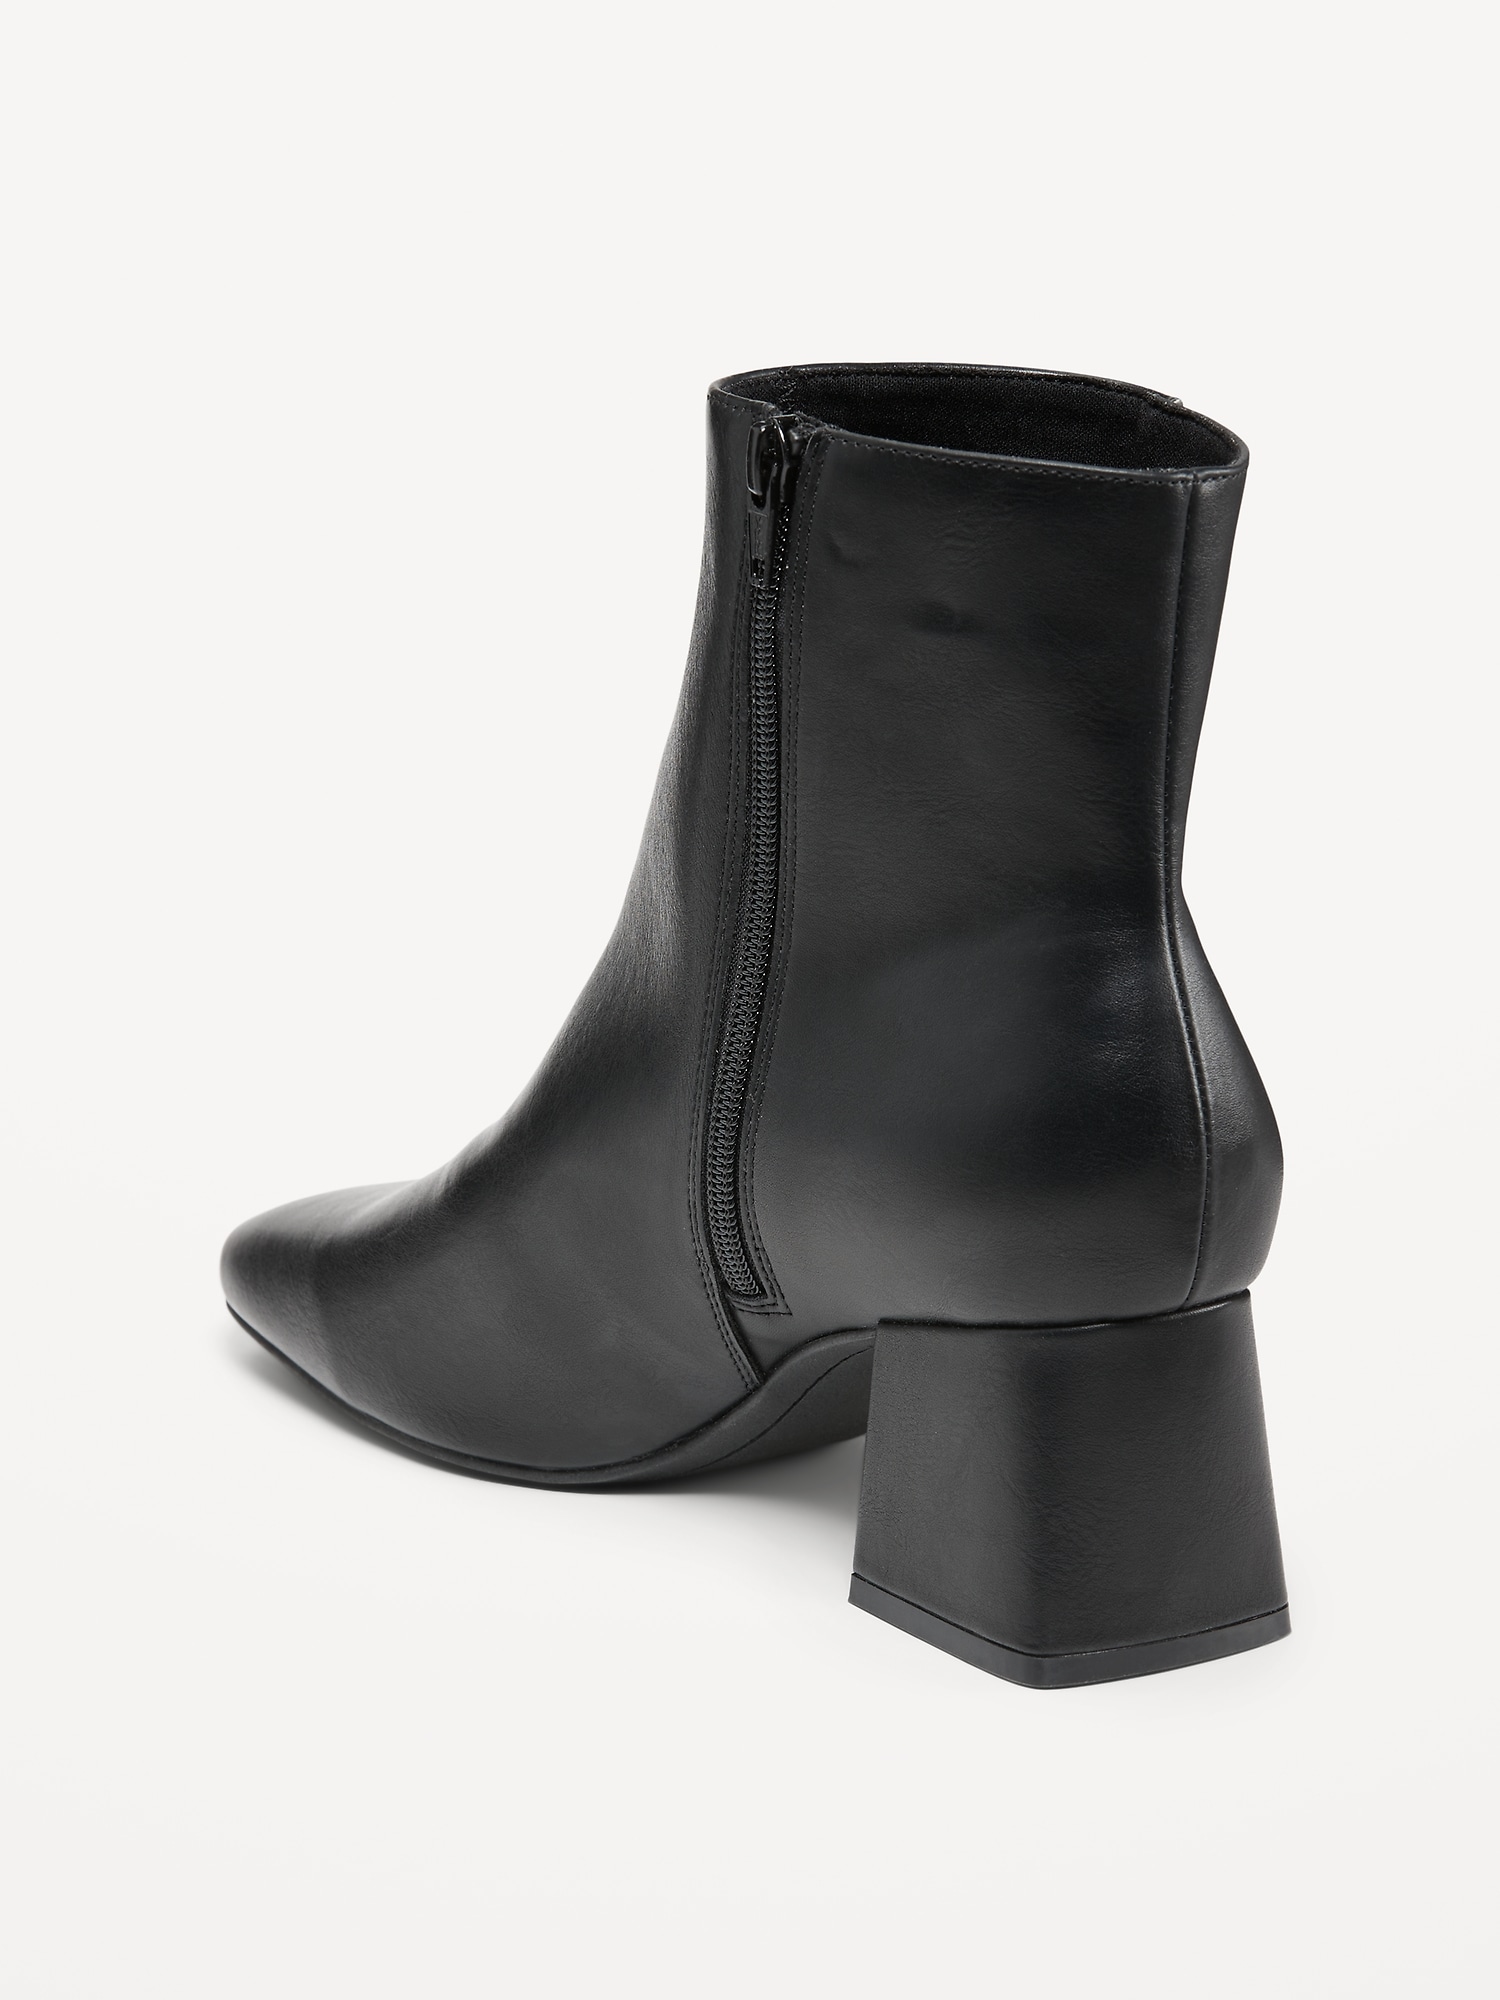 Faux Leather Square Toe Boots for Women | Old Navy